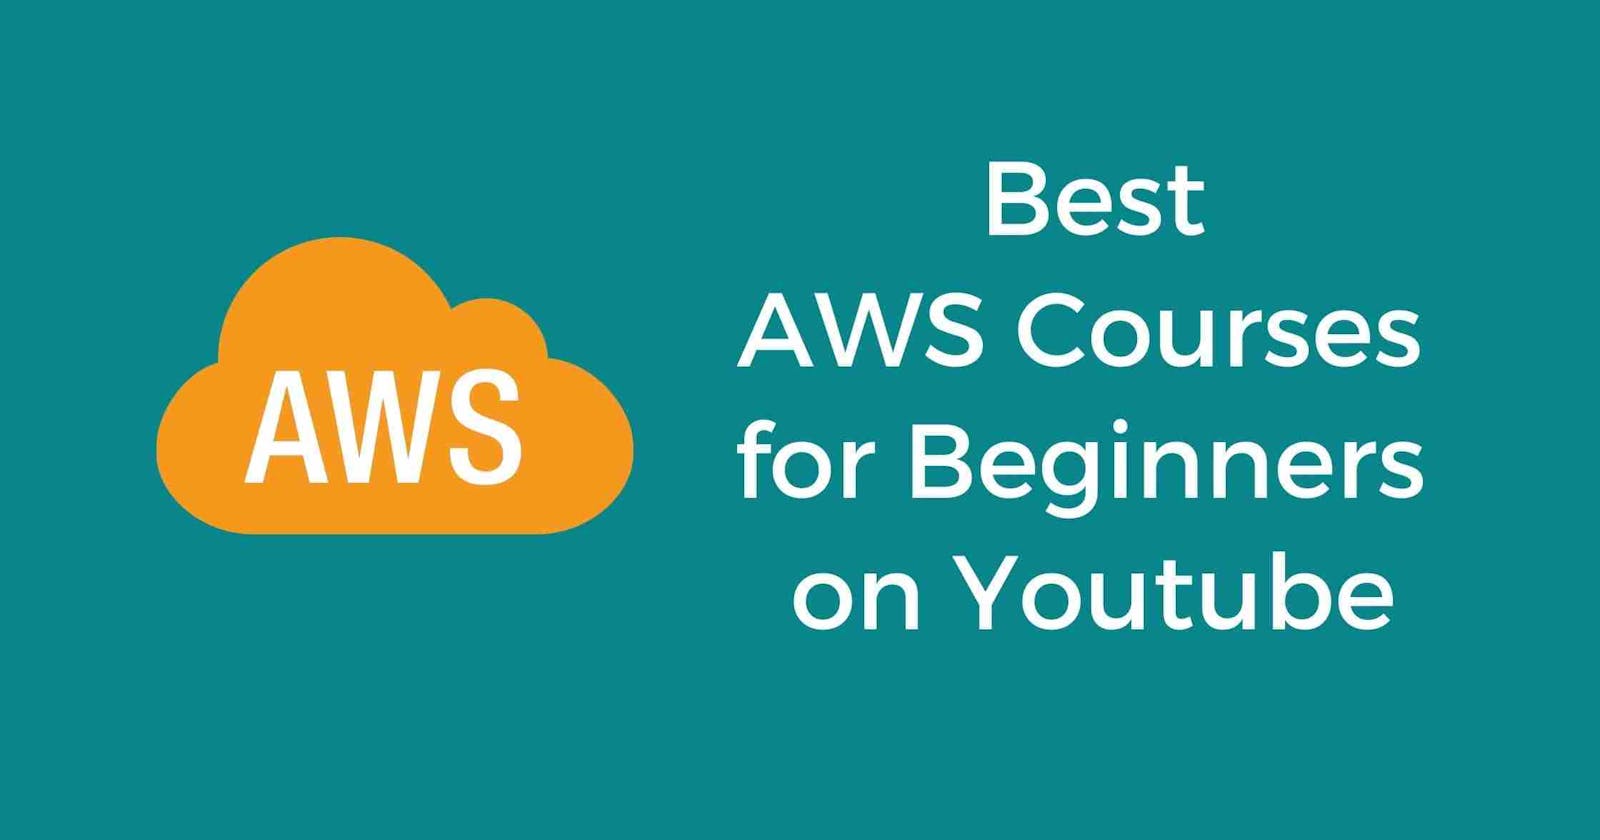 Top Sites and YouTube Channels to Learn AWS